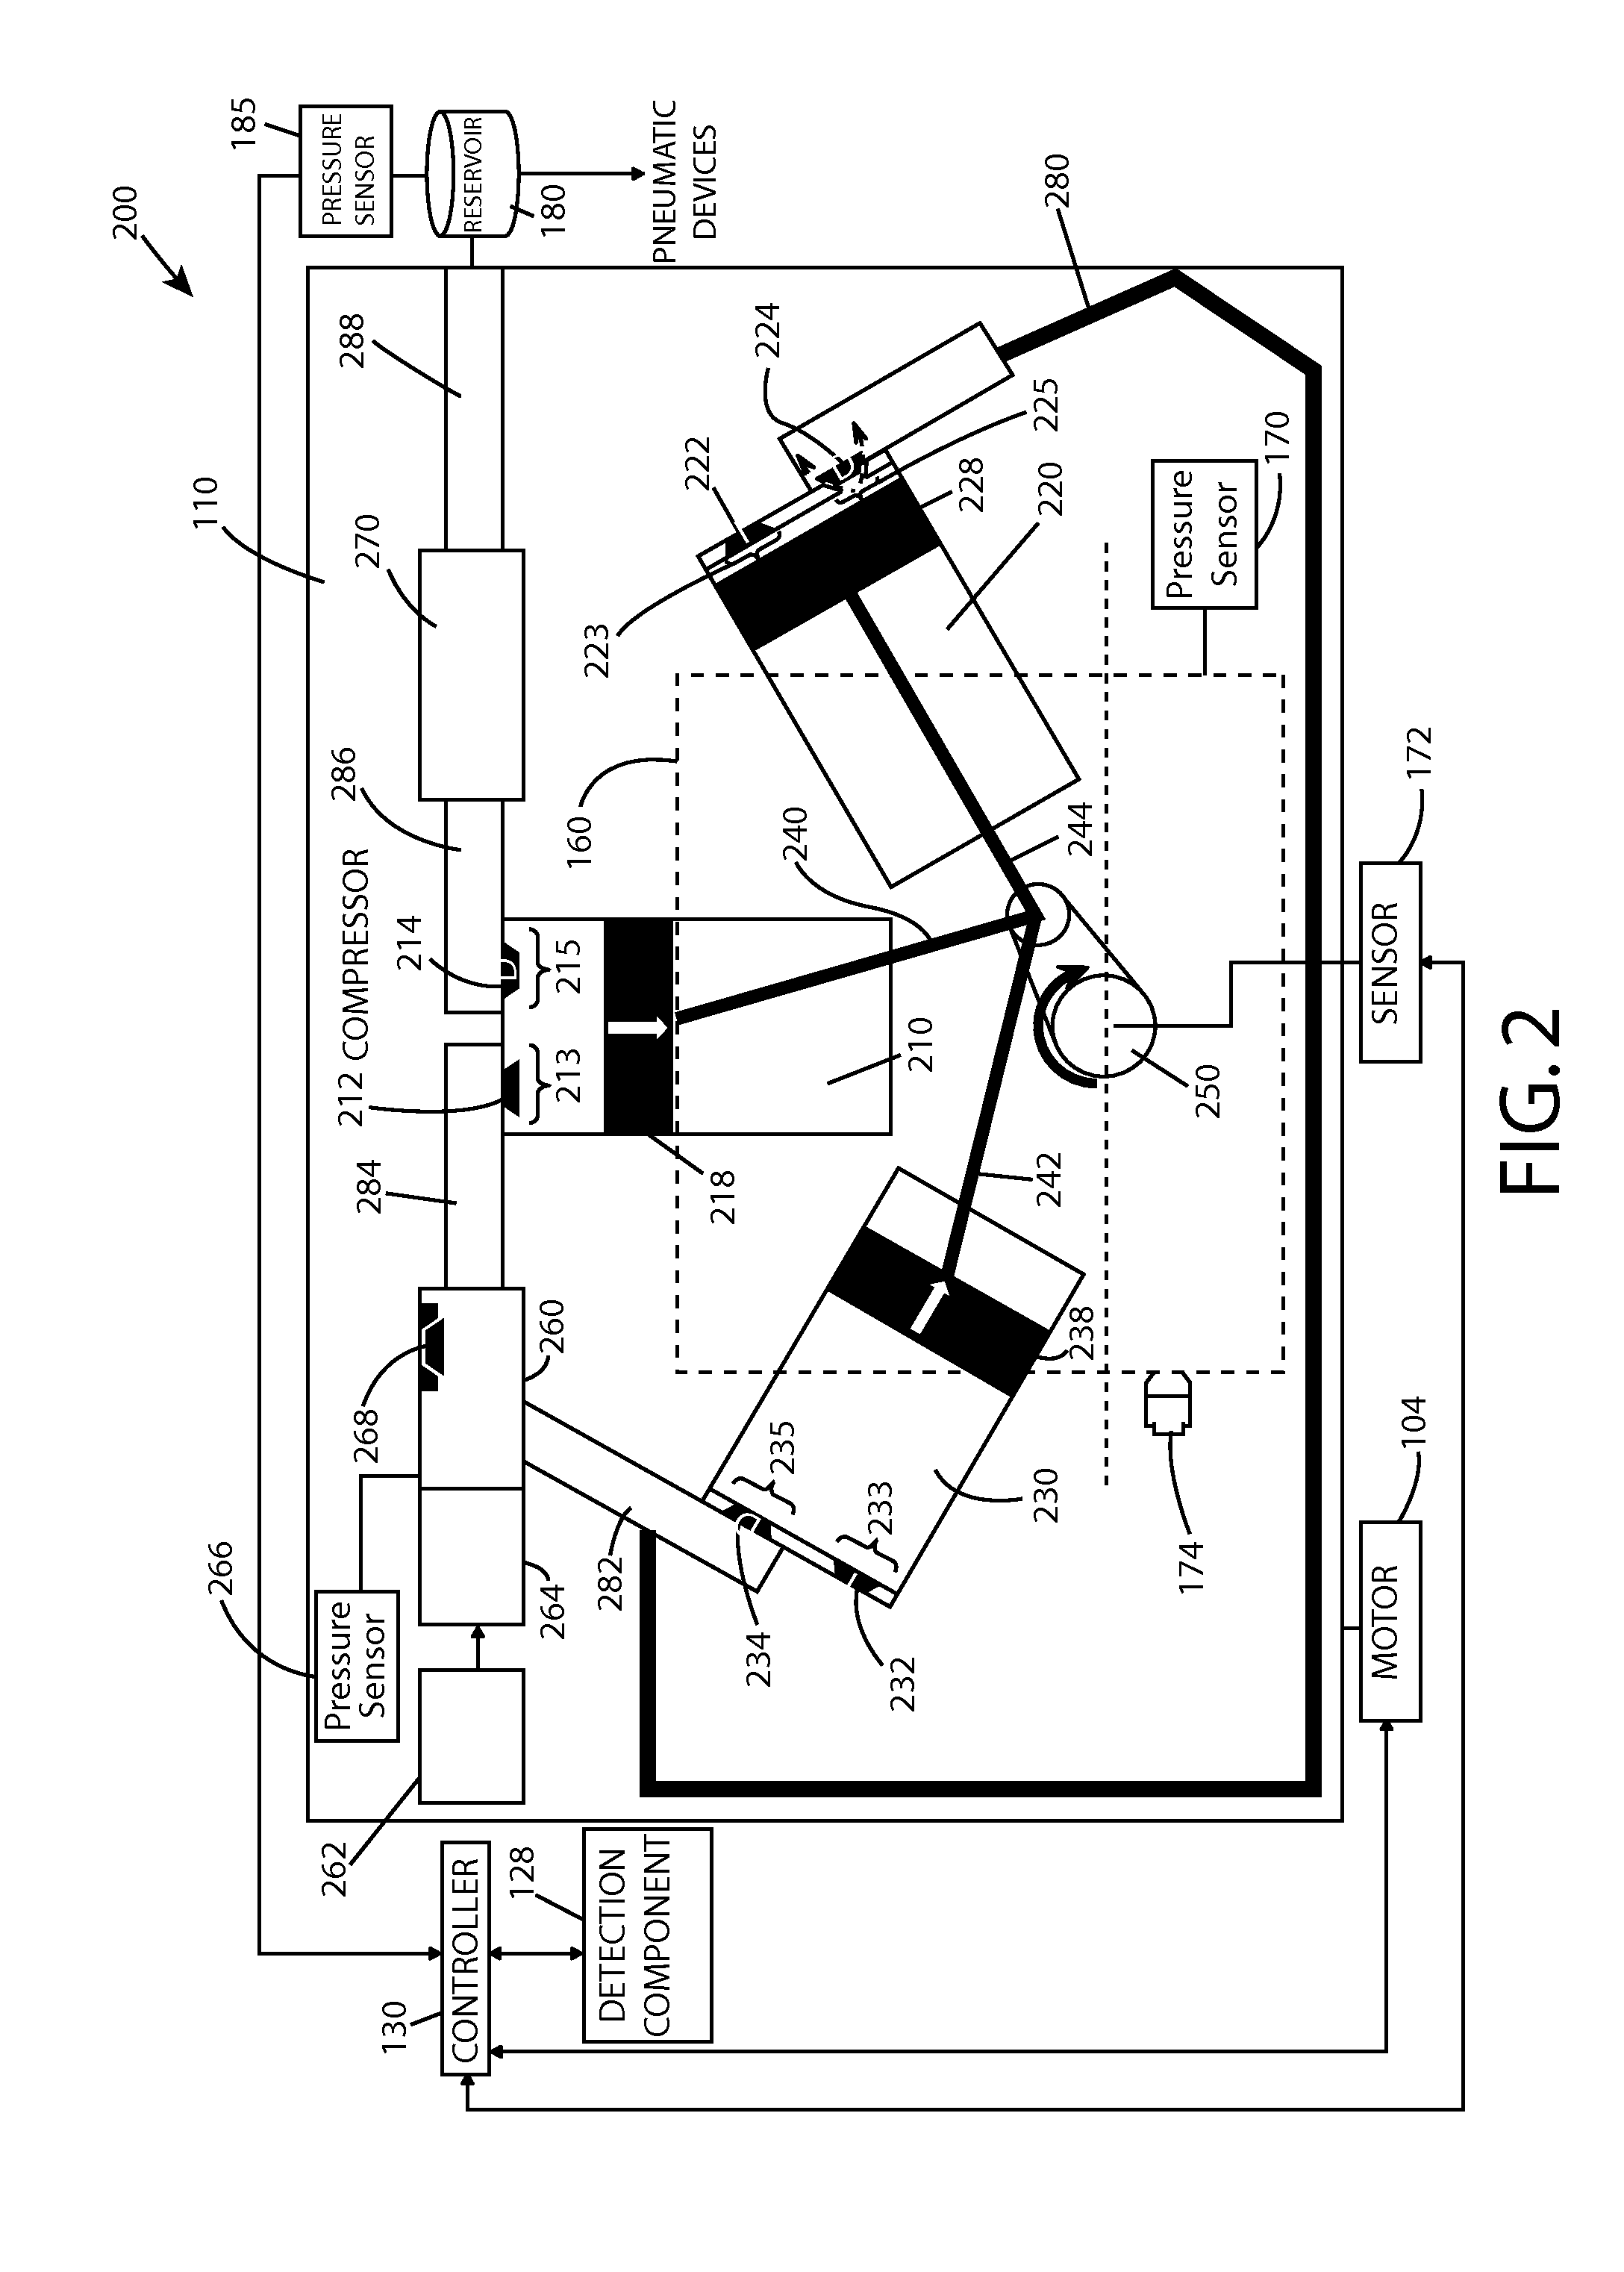 Method and system for reciprocating compressor starting